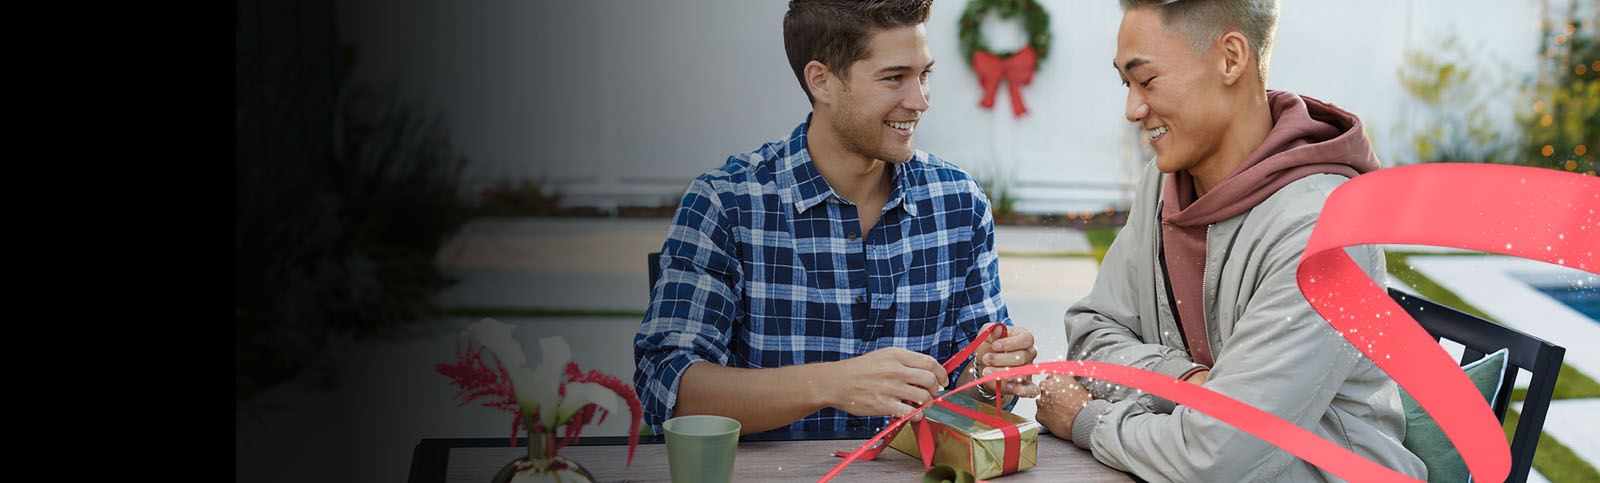 Two men smile and exchange presents outside